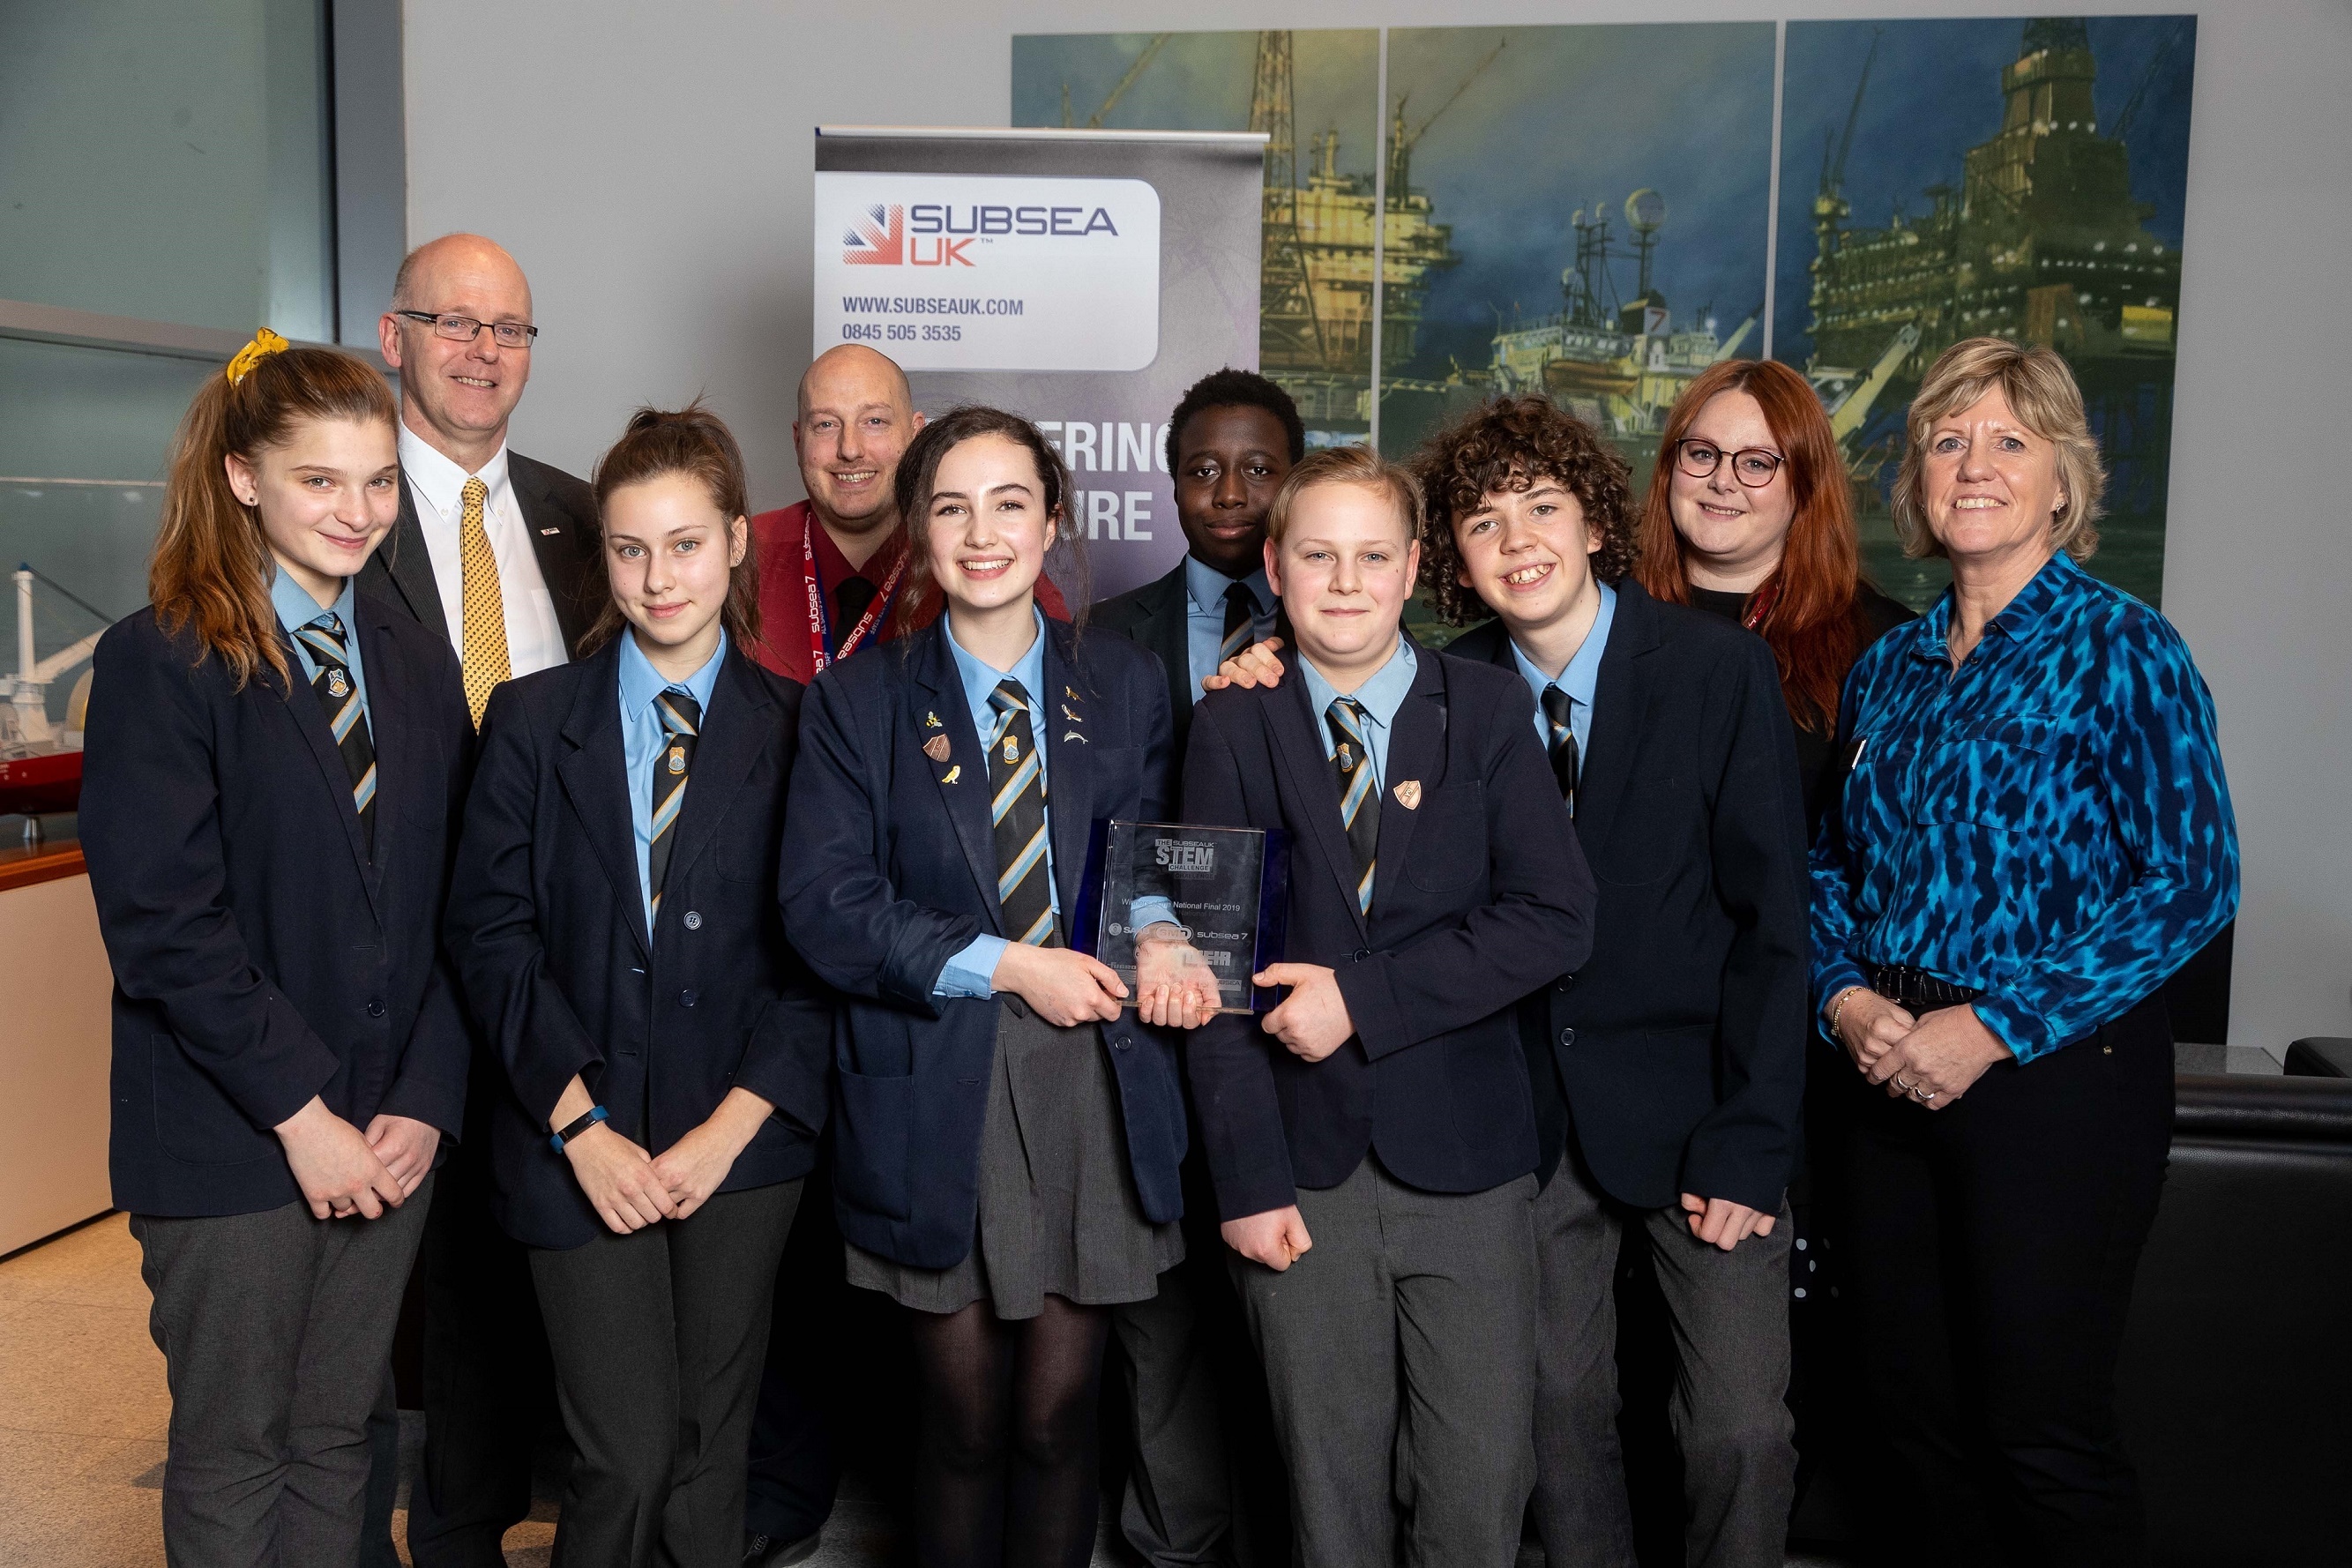 A team of pupils from All Saints Catholic High School in Sheffield have been crowned champions of the Subsea UK 2019 STEM Challenge.